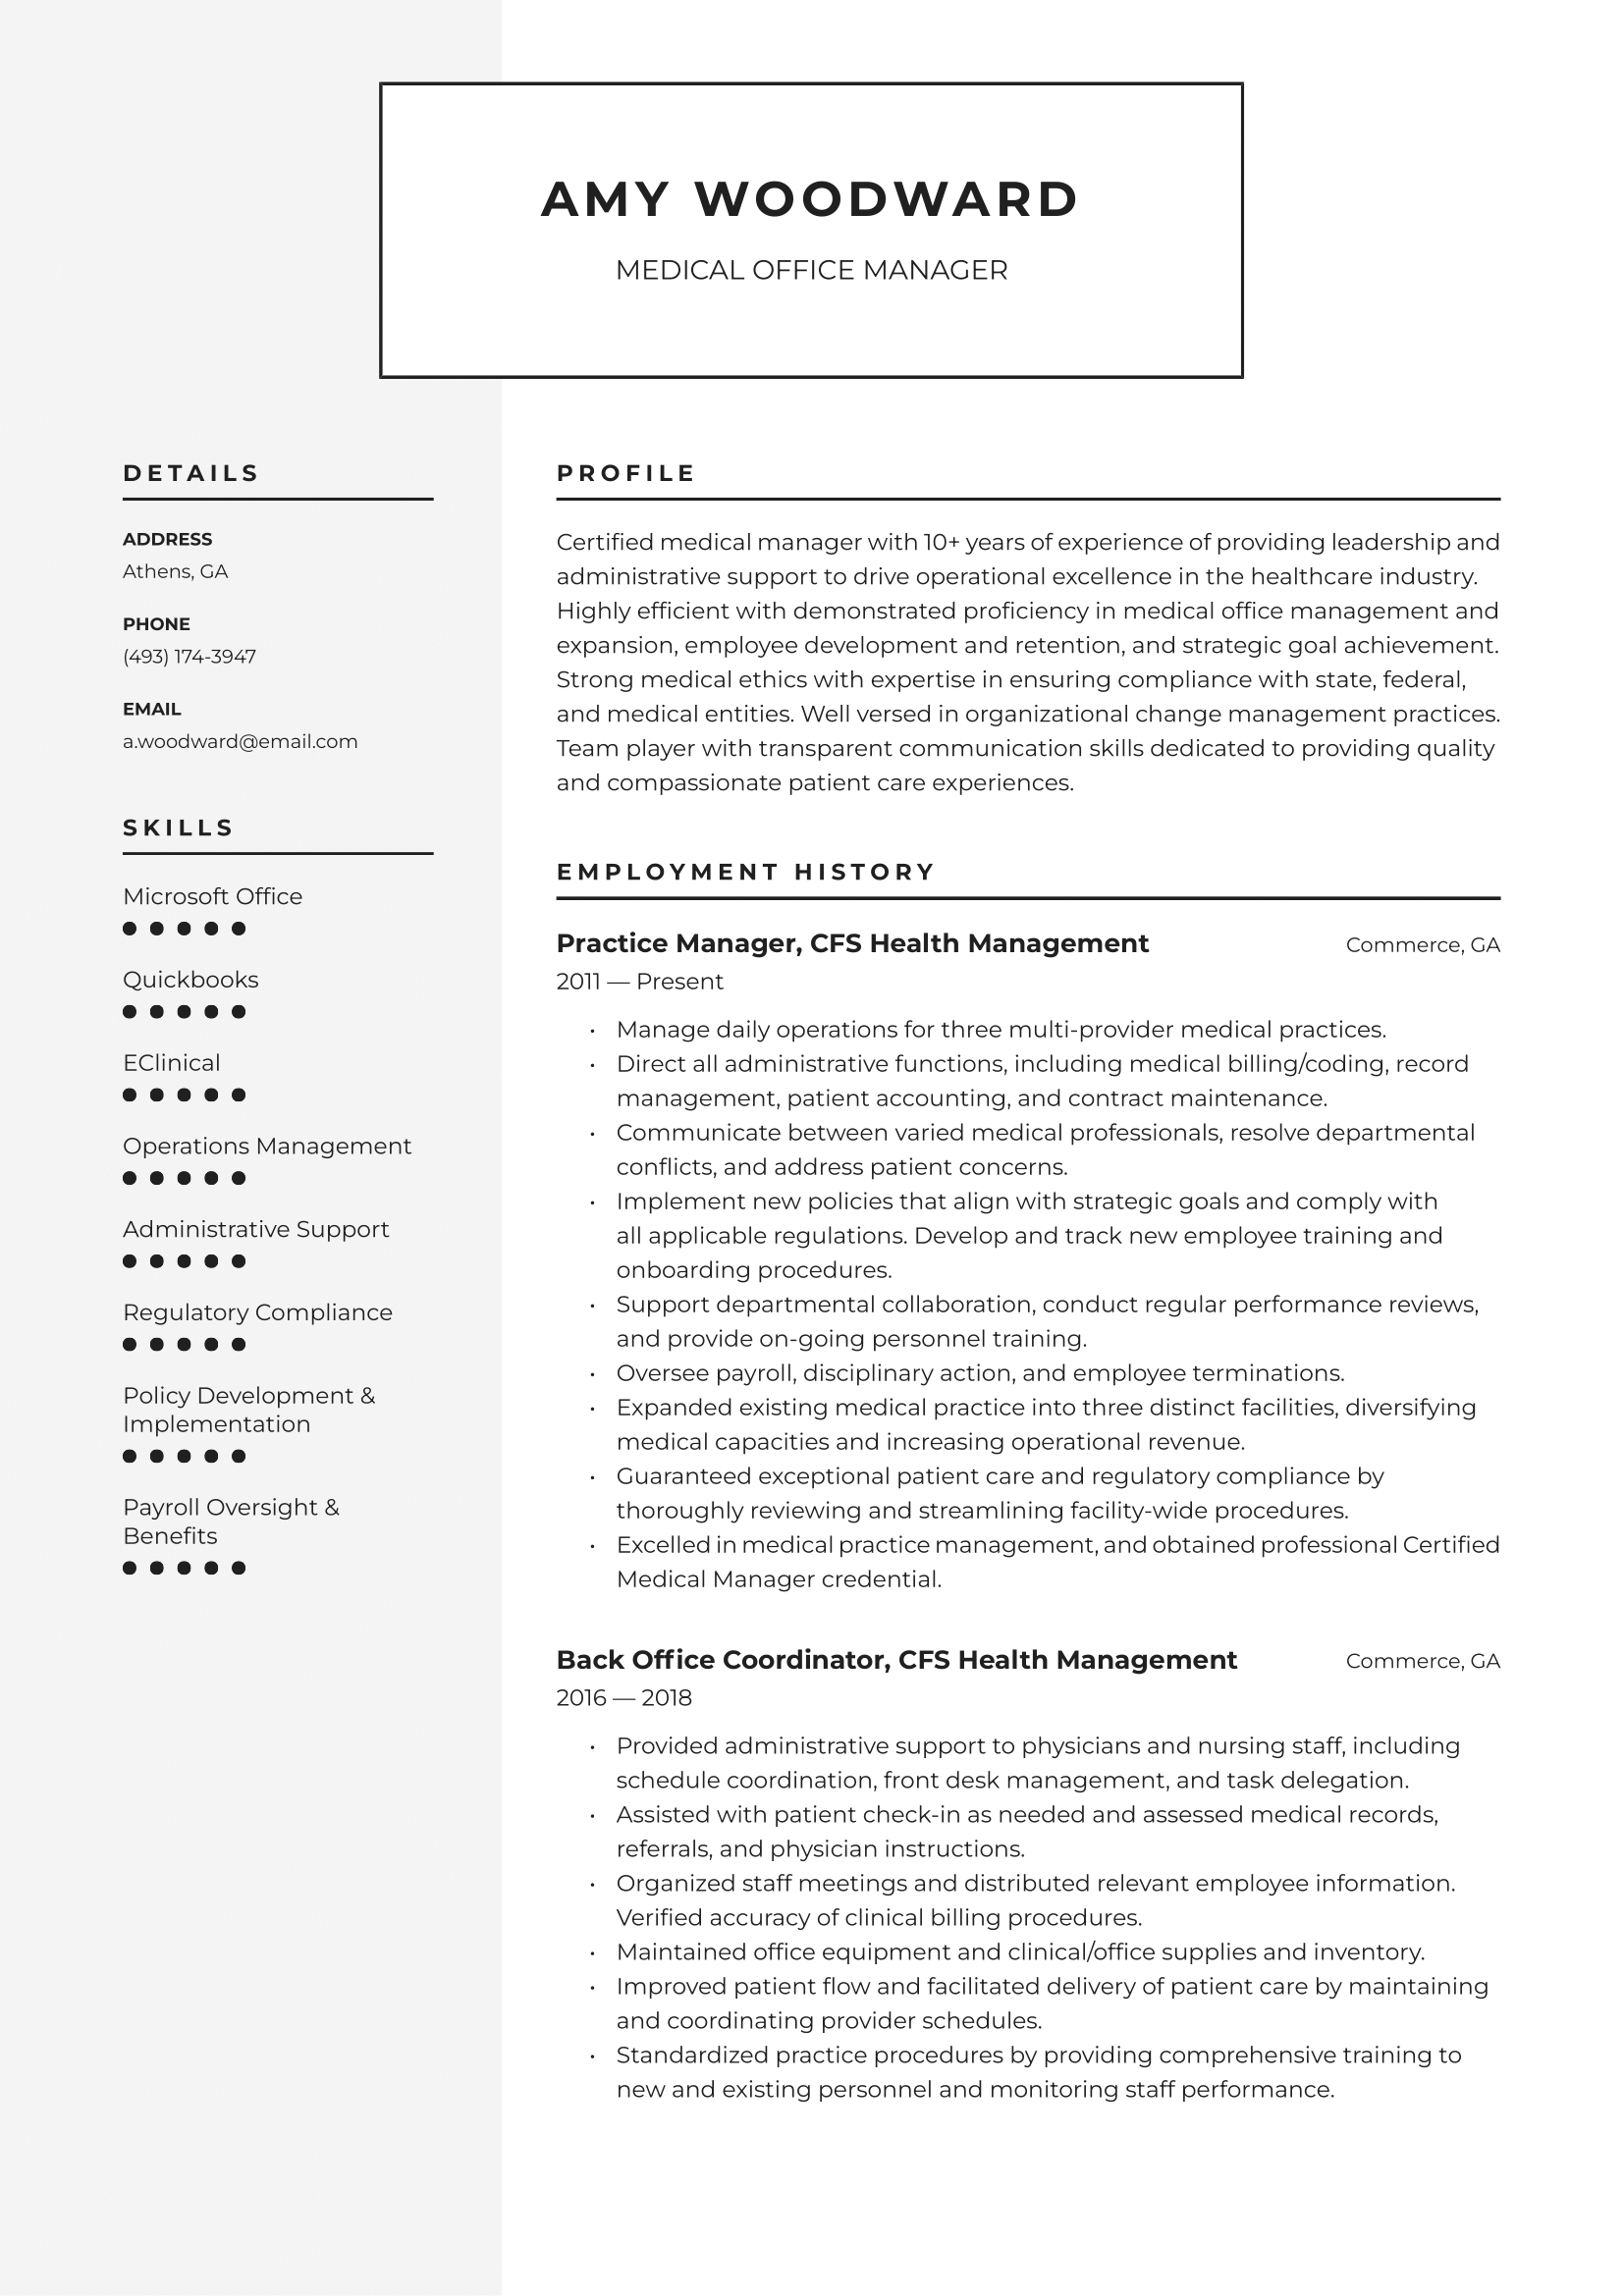 Medical_Office_Manager-Resume-Example.png